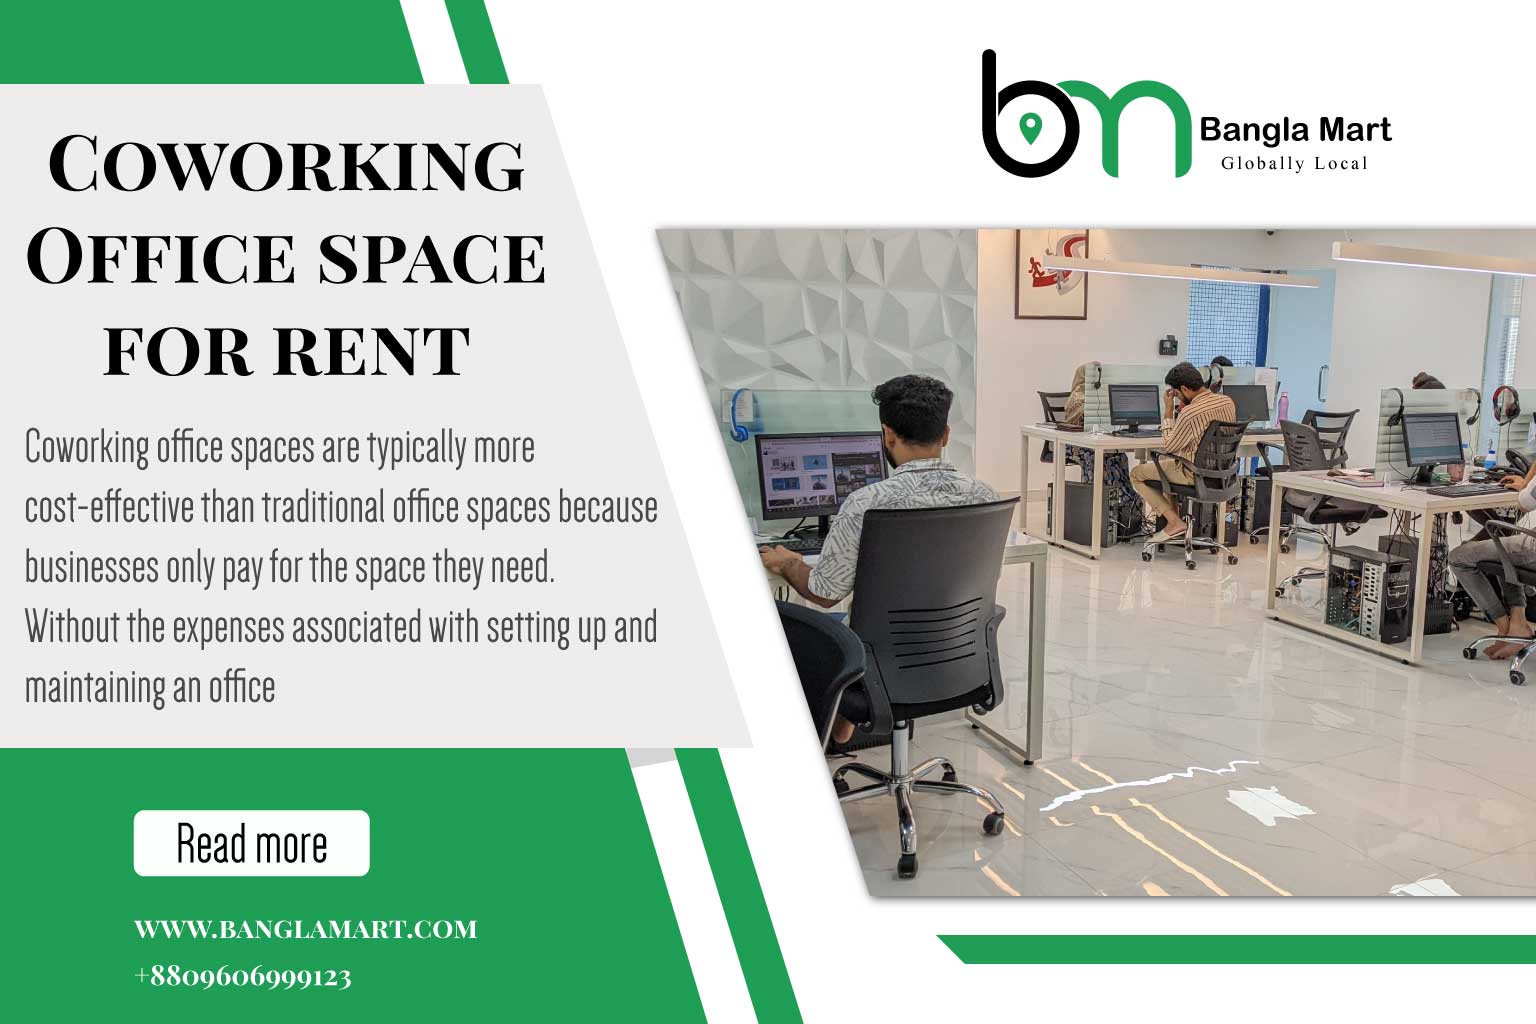 Coworking Office space for rents